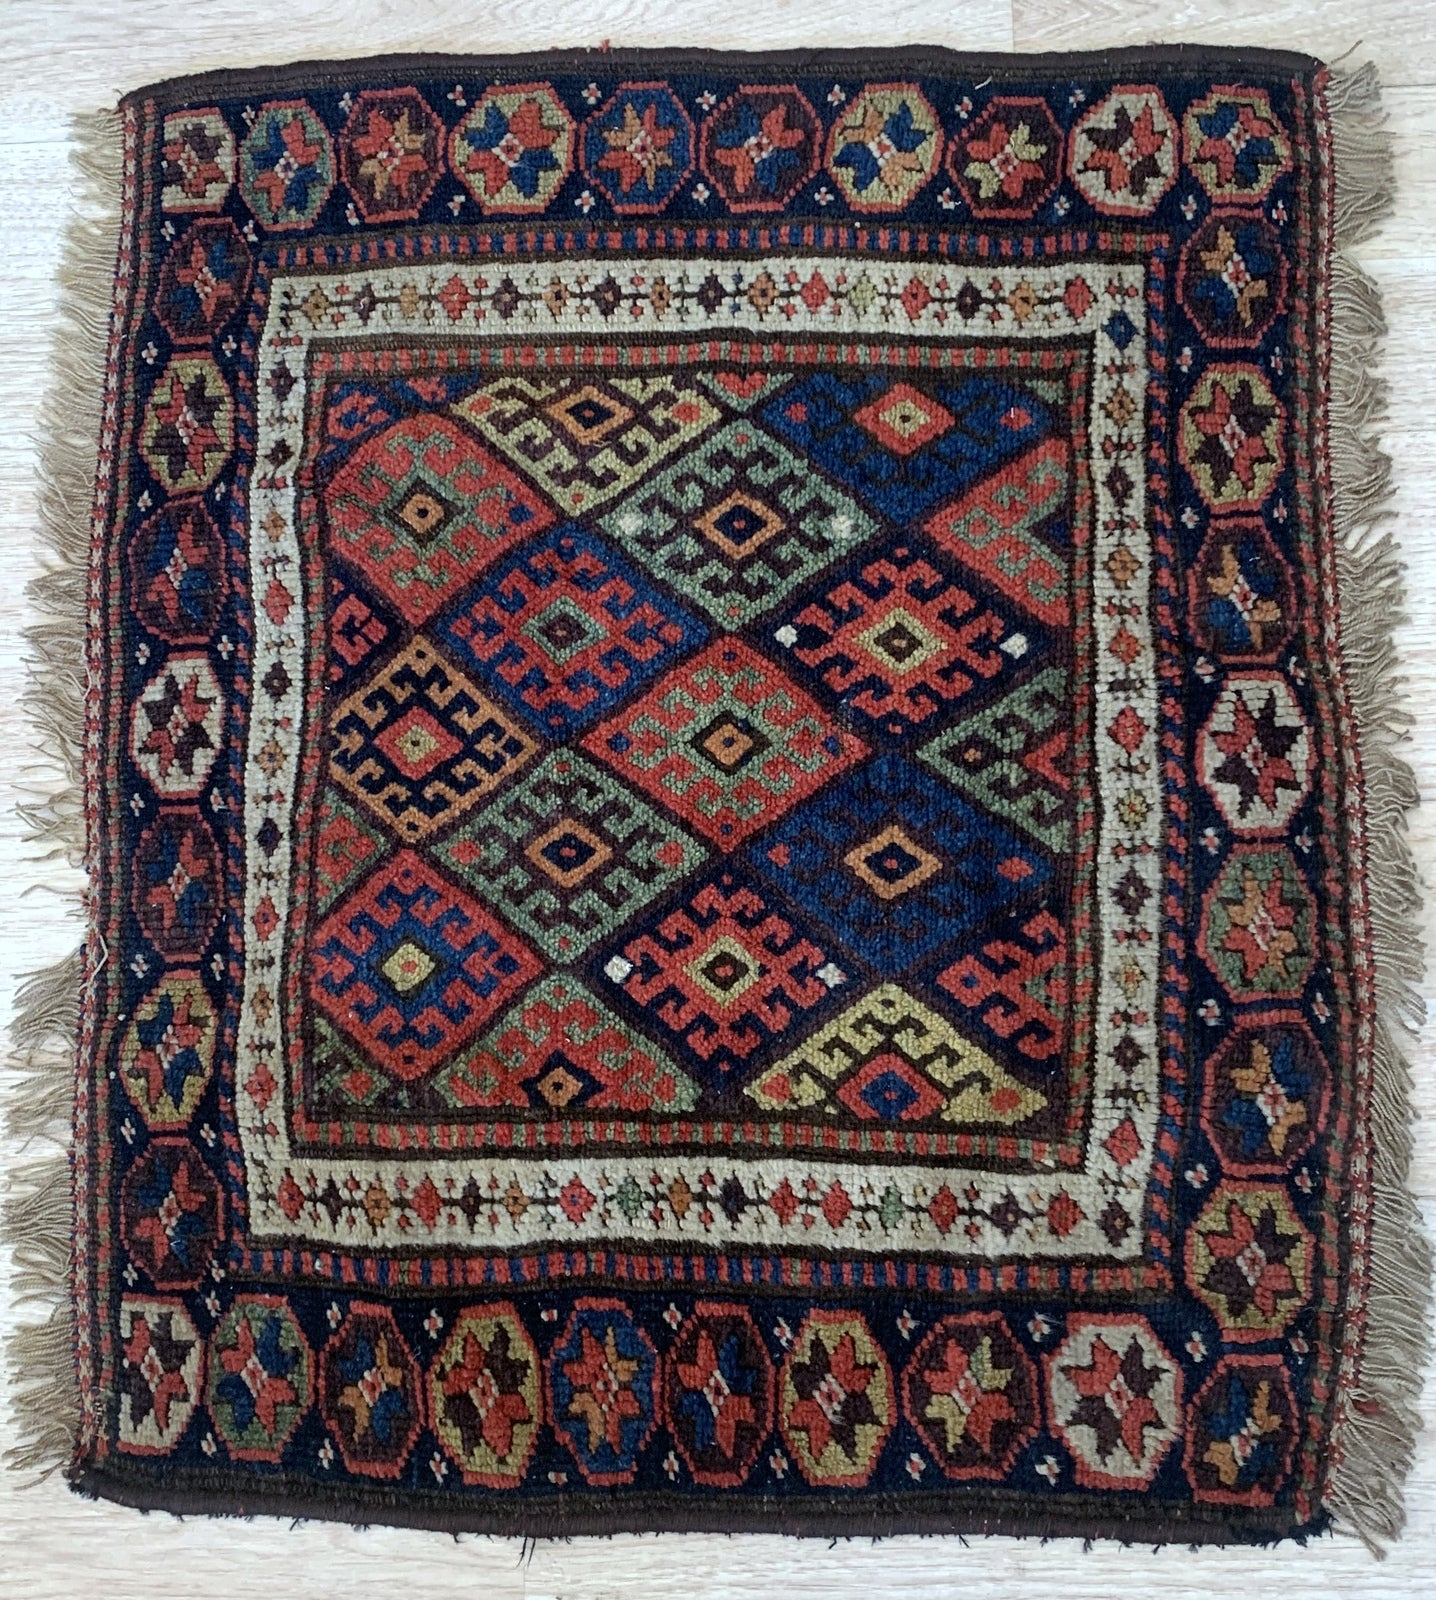 Handmade antique Persian Kurdish jaf bag face in original good condition. The rug has been made in the end of 19th century in Persia. All dyes on the bag face are natural. This rug is collectible piece.